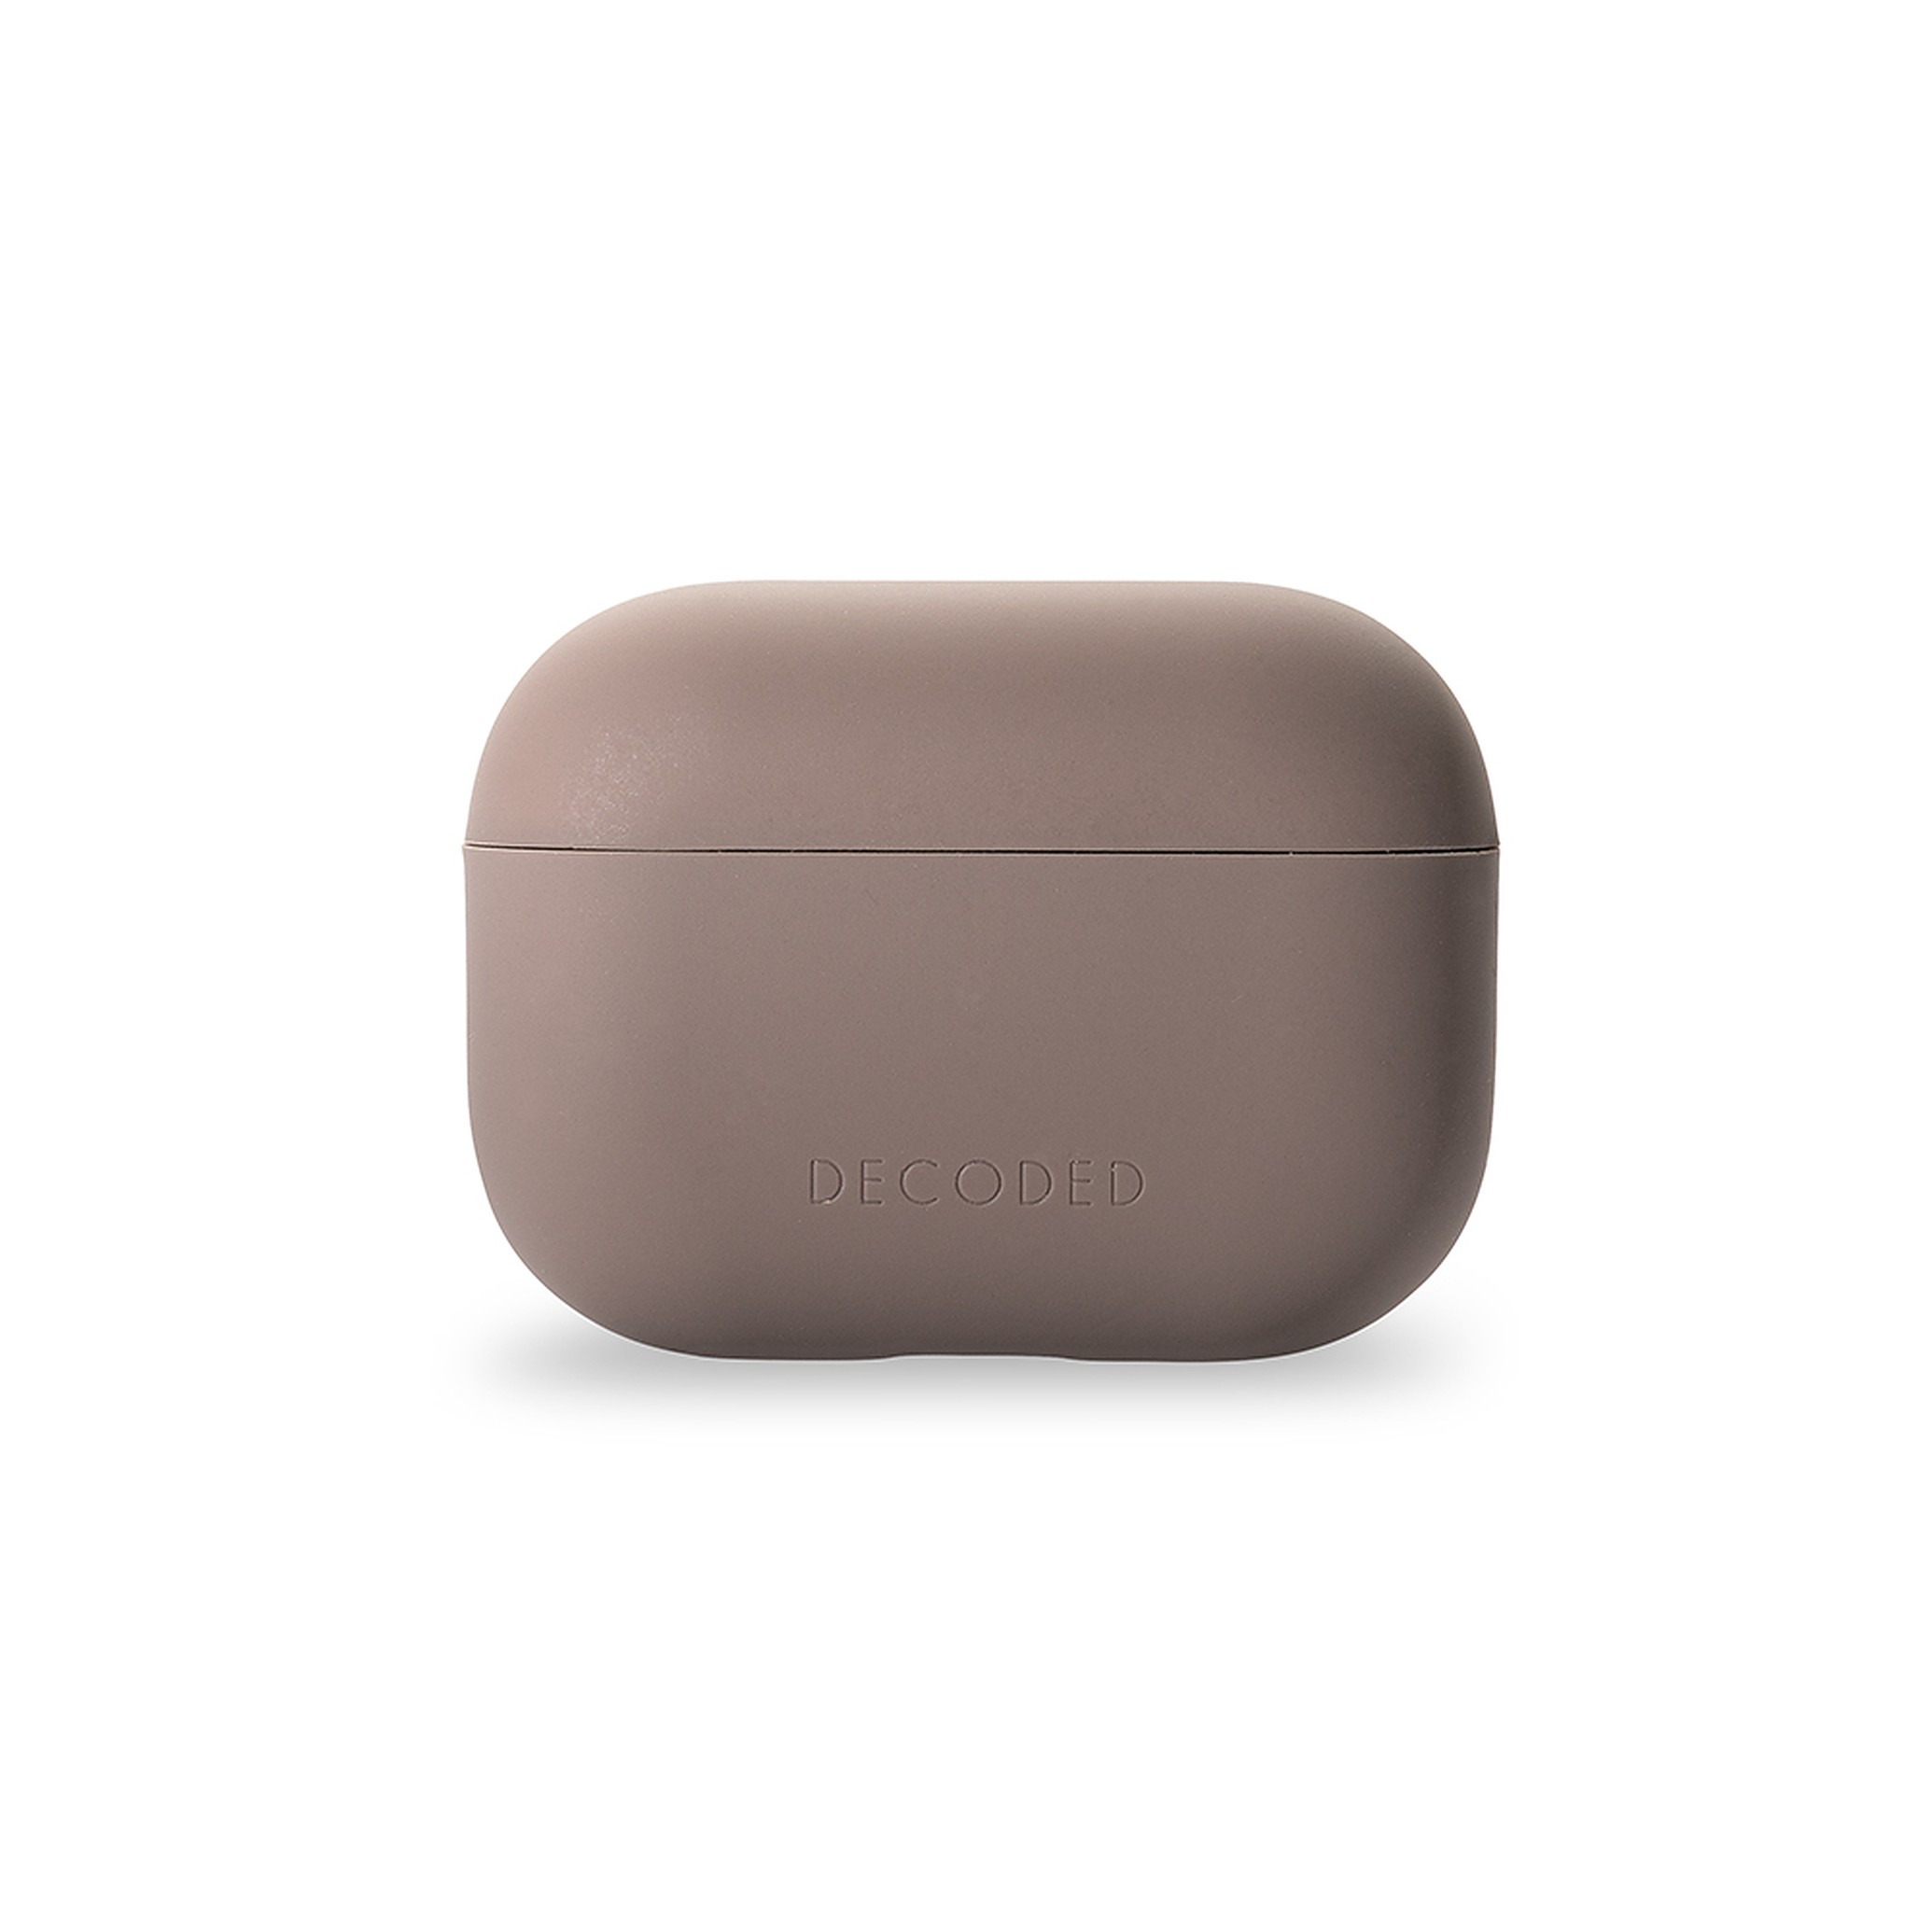 Aircase, Apple, DECODED Cover, 3, Dark Full taupe Airpods